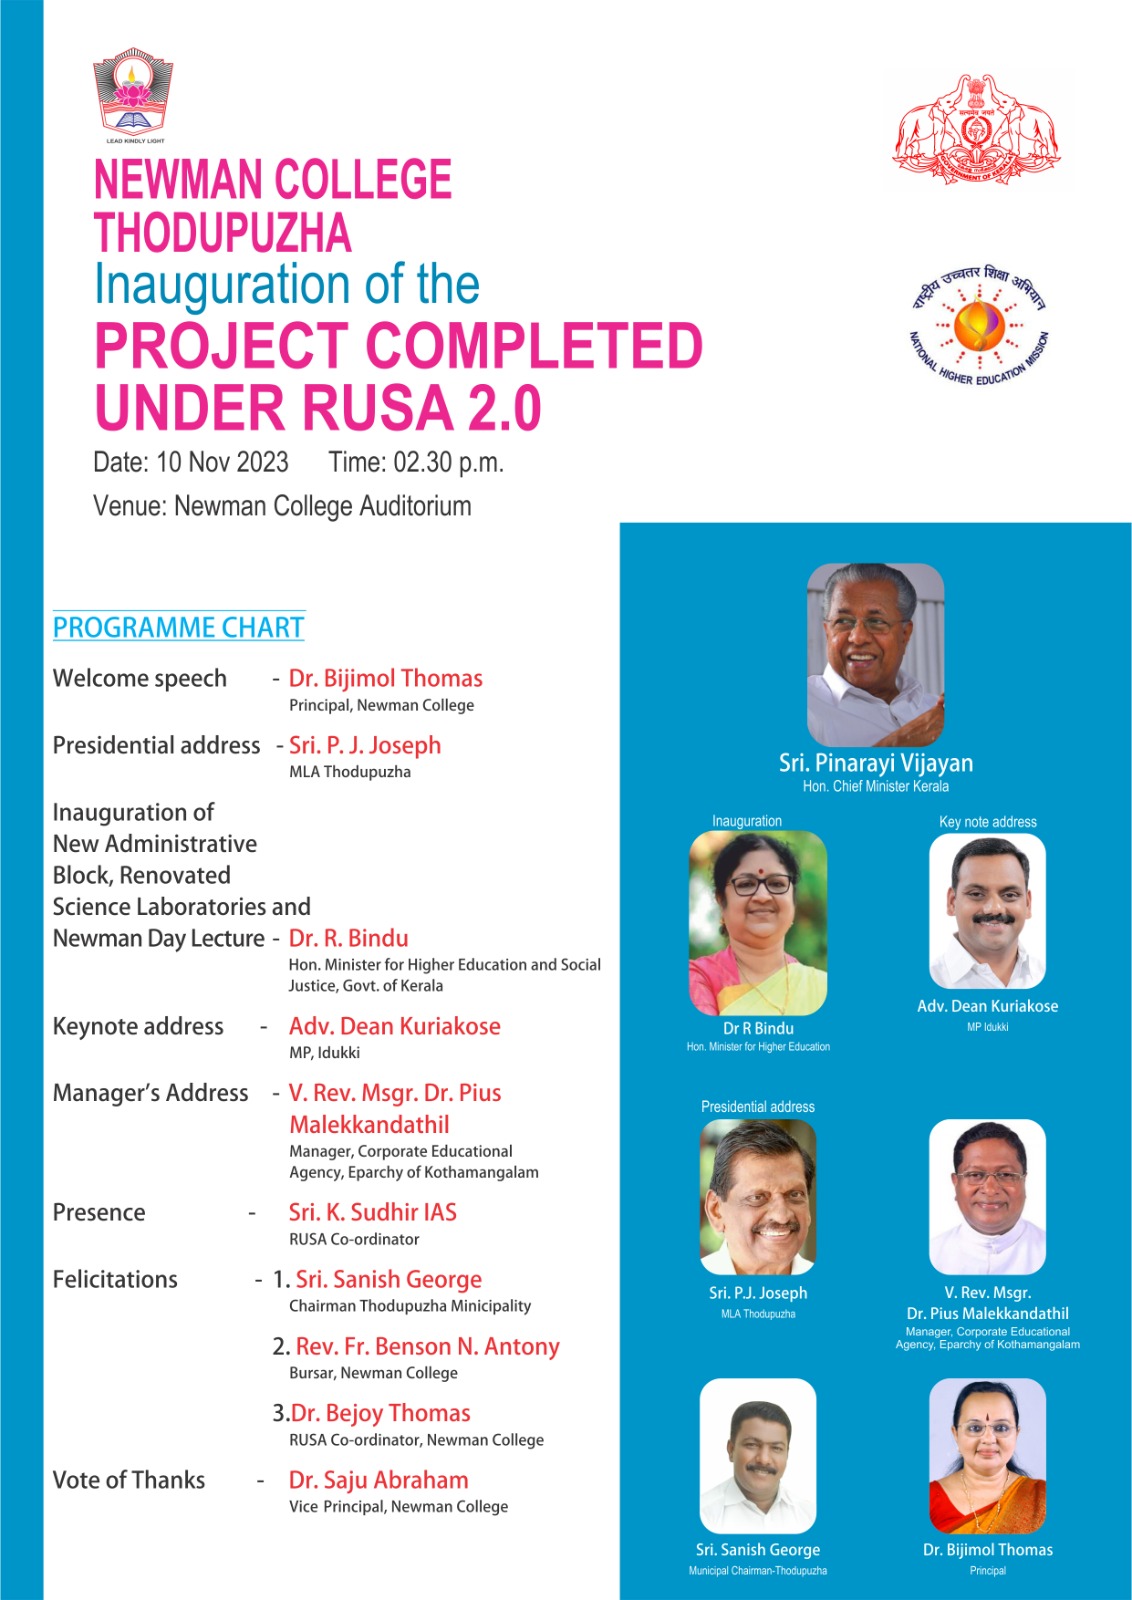 Inauguration of Project Completed under RUSA 2.0